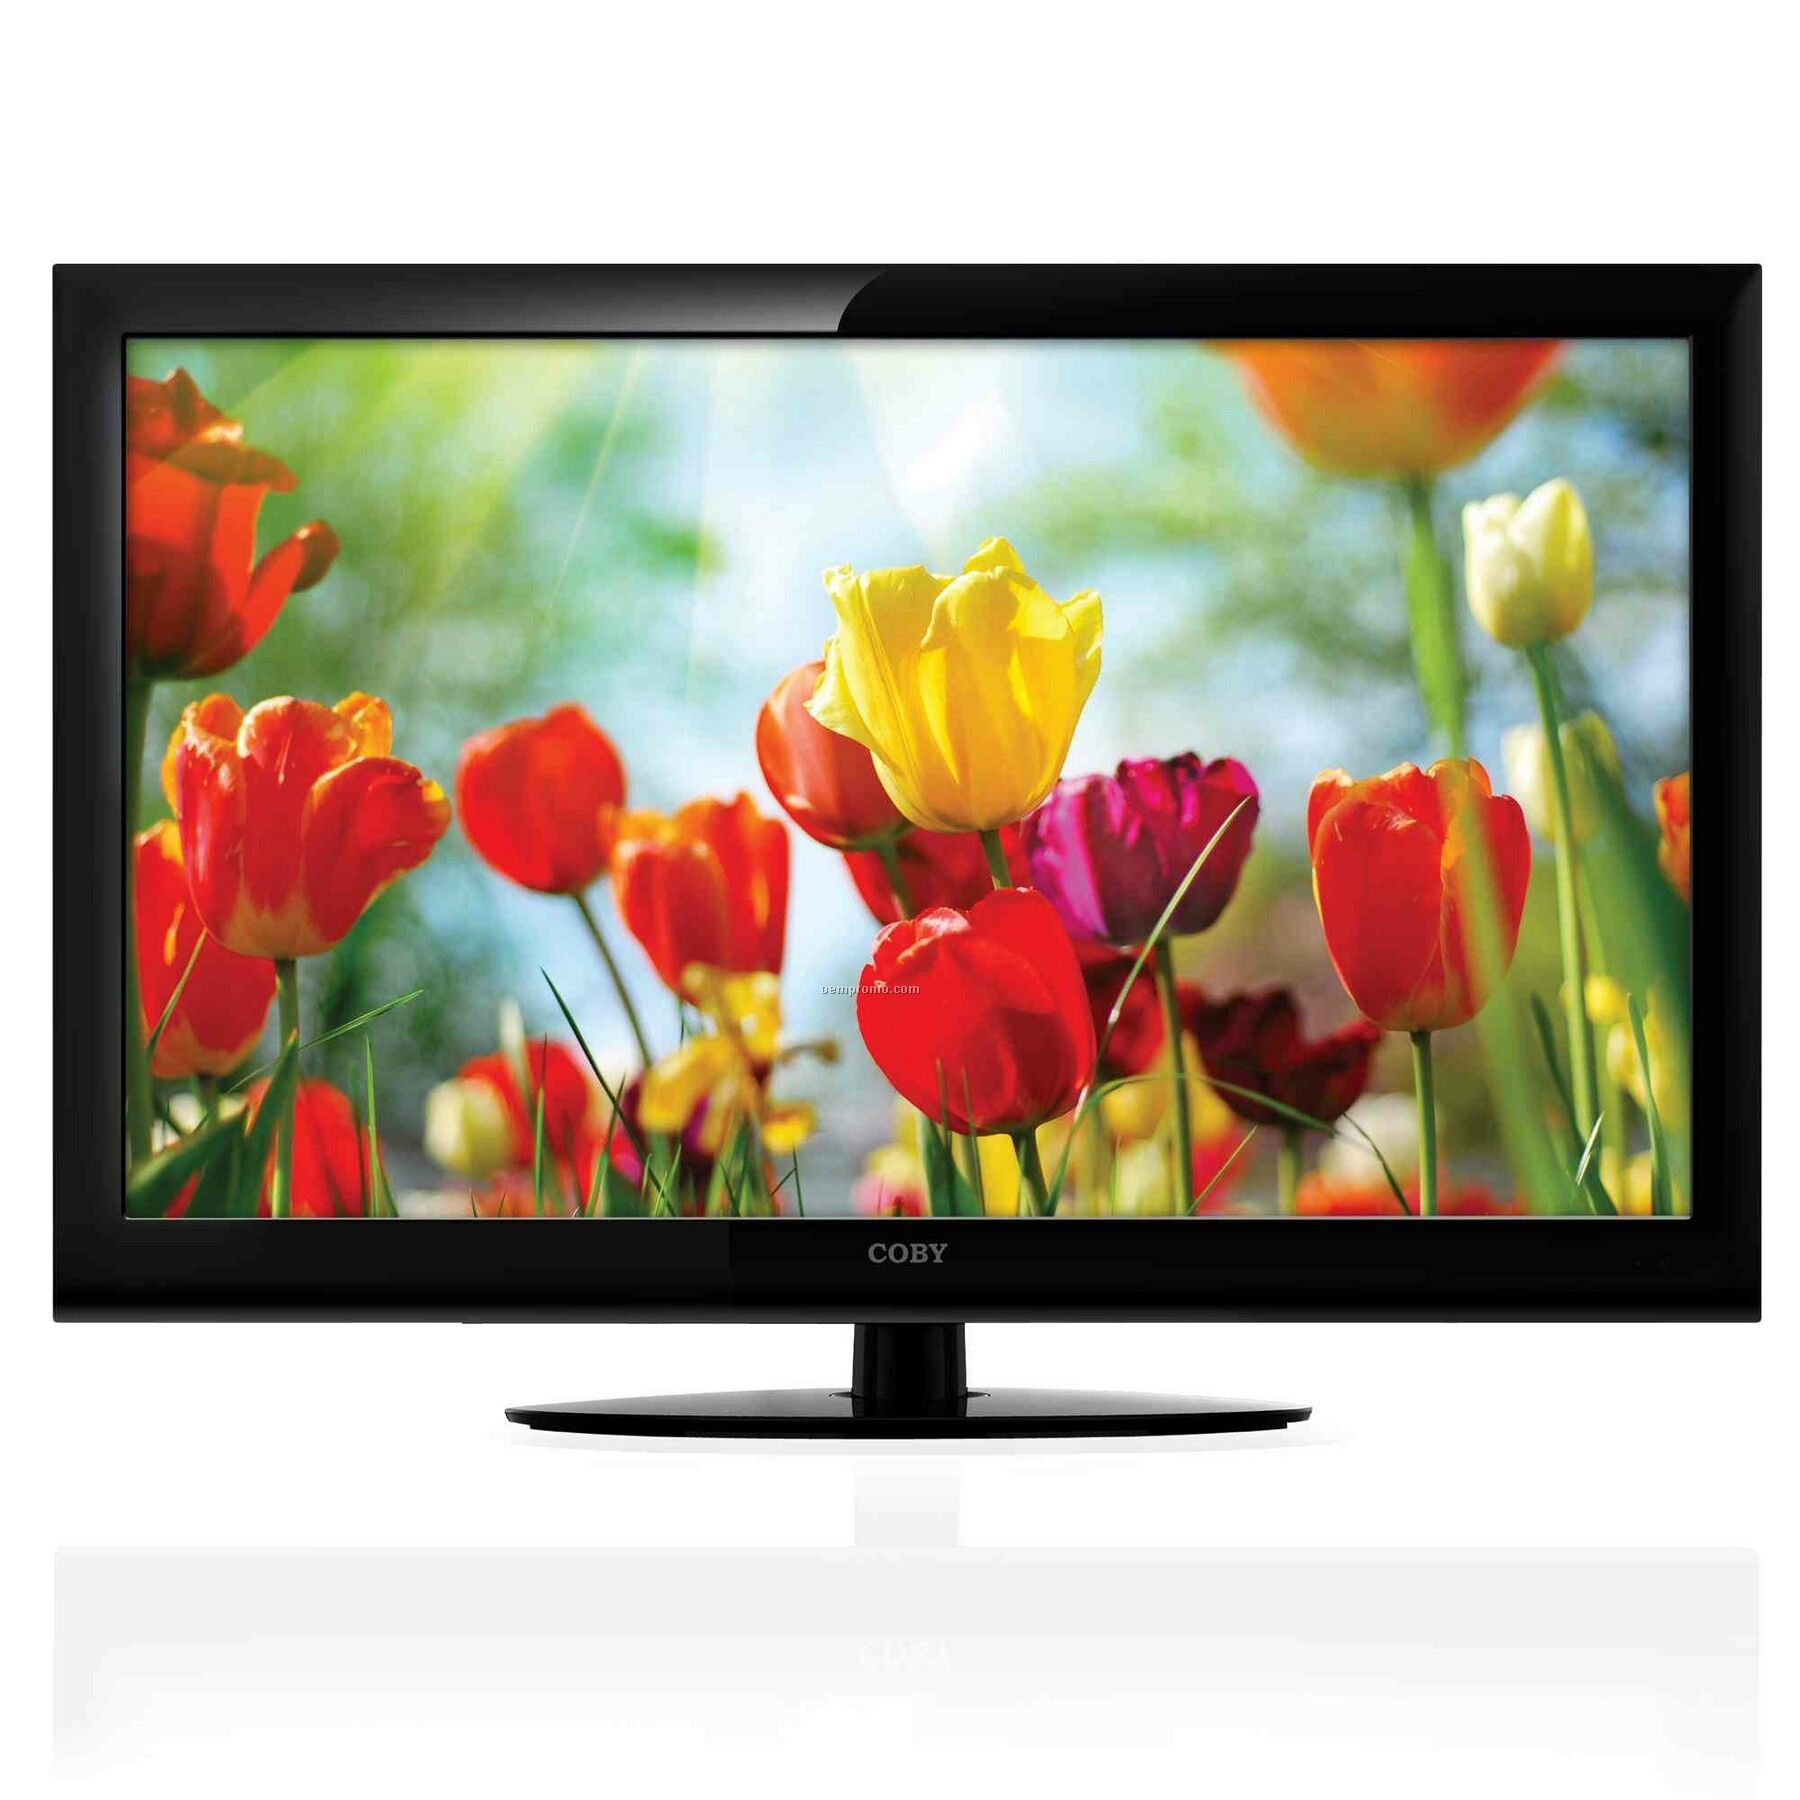 55" Class LED High-definition Tv